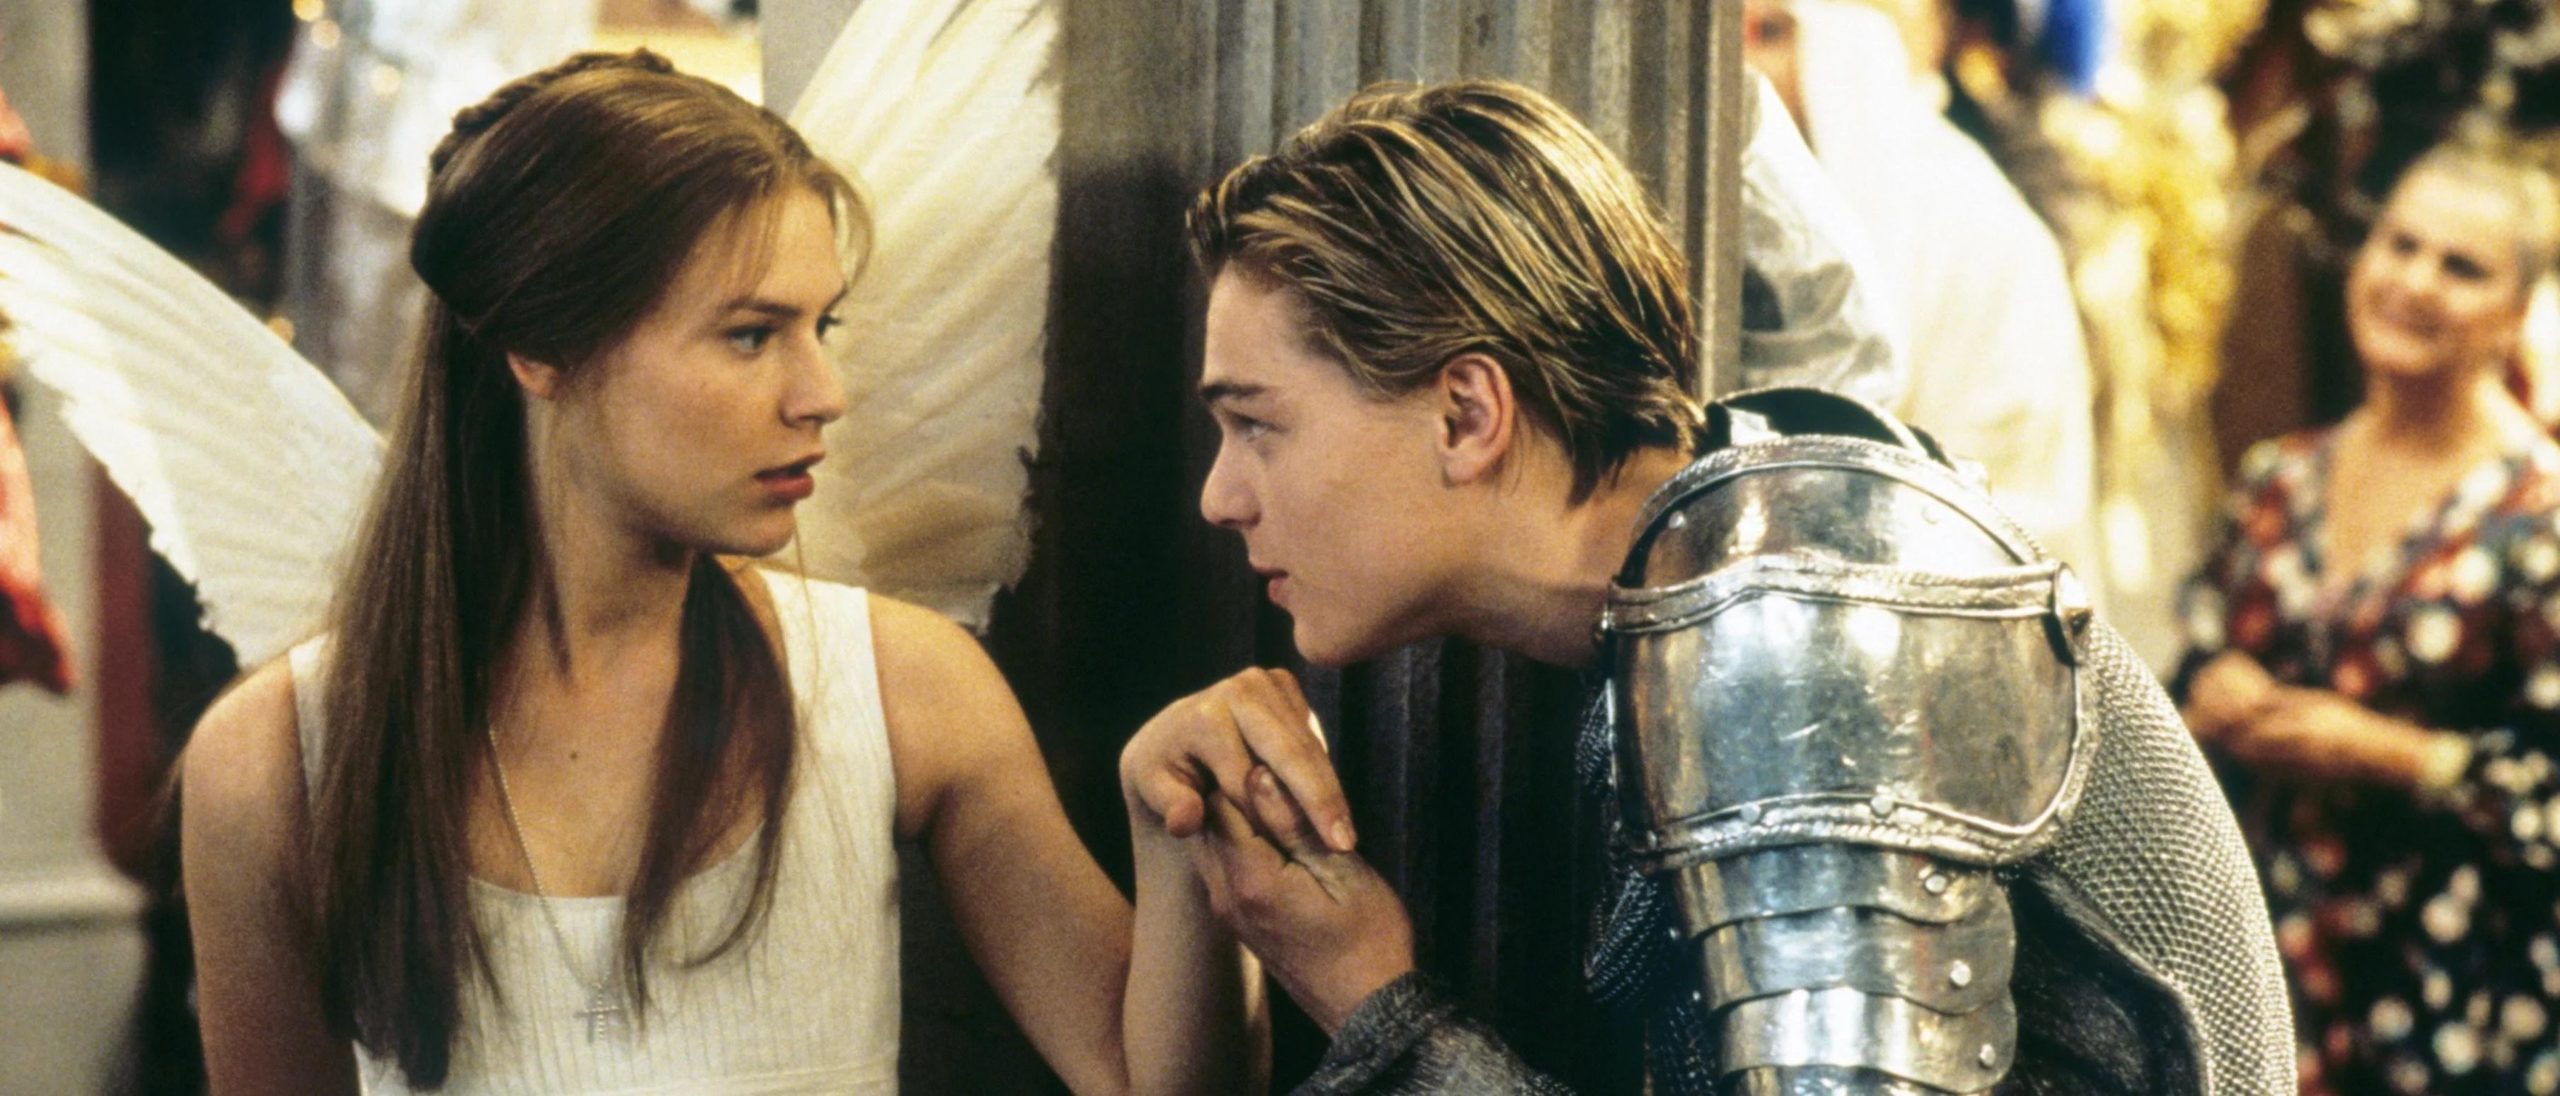 Leonardo DiCaprio, wearing silver armour, takes Clare Danes' hand to kiss, in Romeo + Juliet